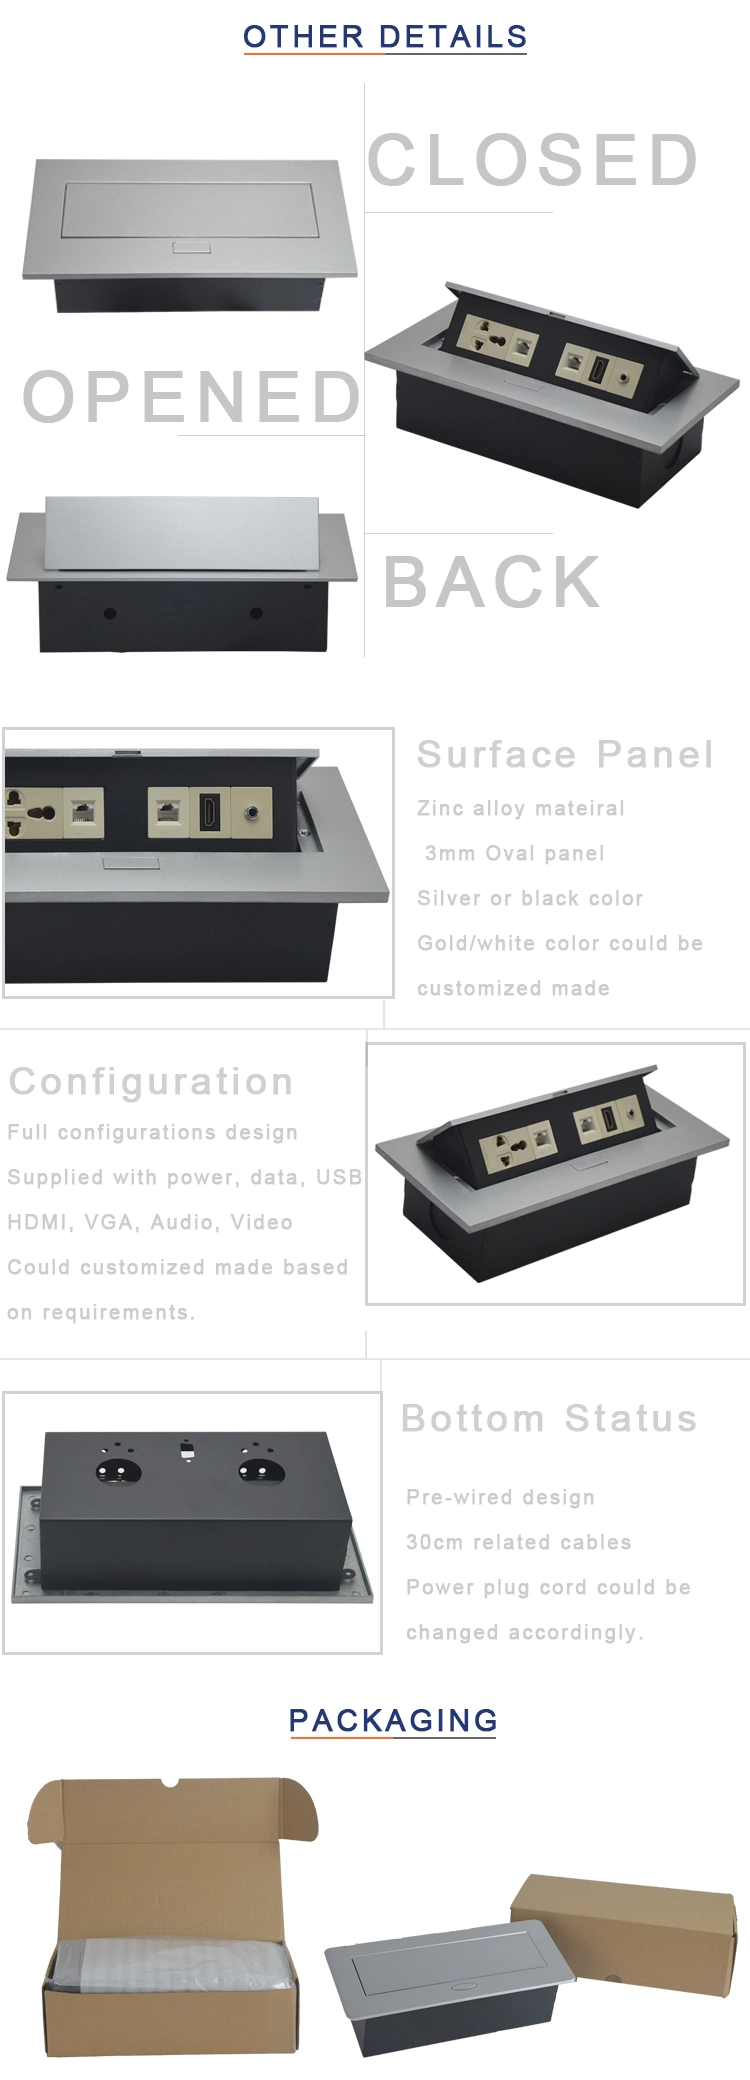 New Design Square Corner Zinc Alloy Material Pop up Desktop Socket with Double Network Interface Used for Office Hotel School